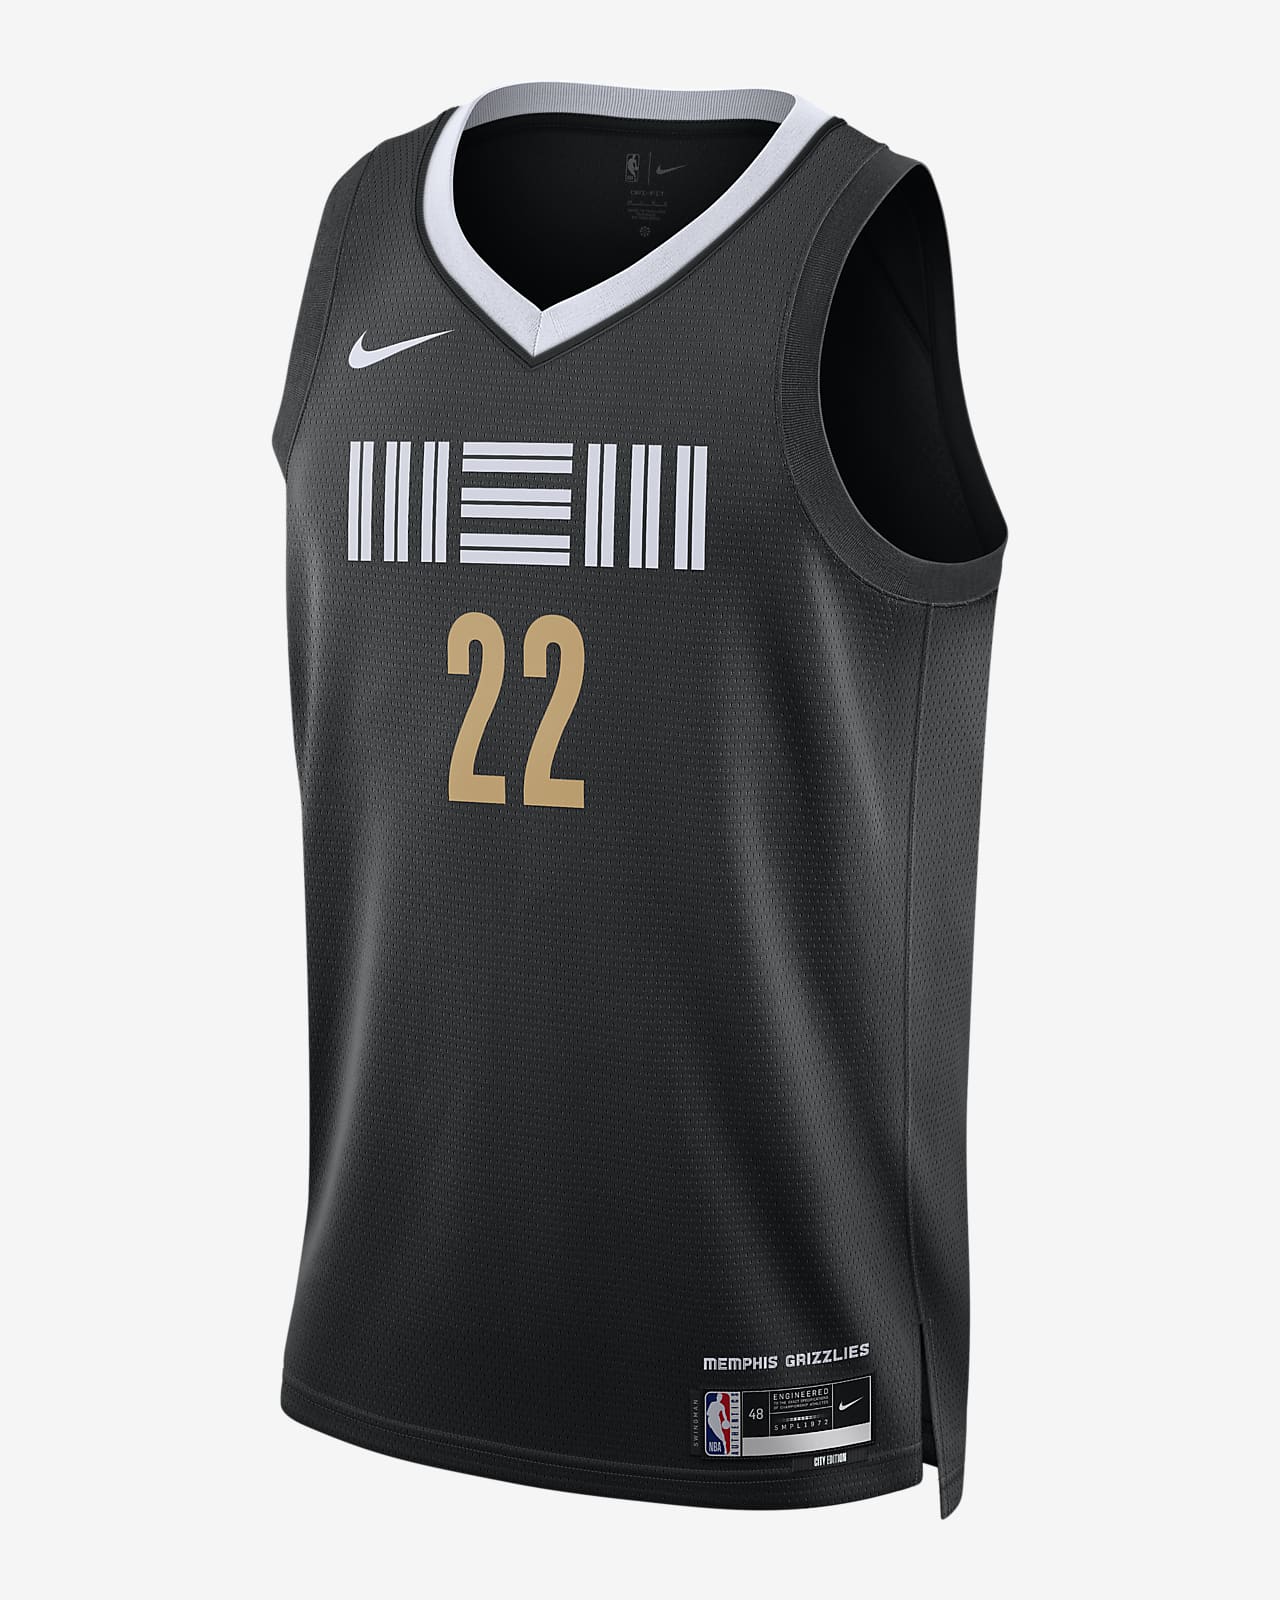 Grizzlies current player jersey